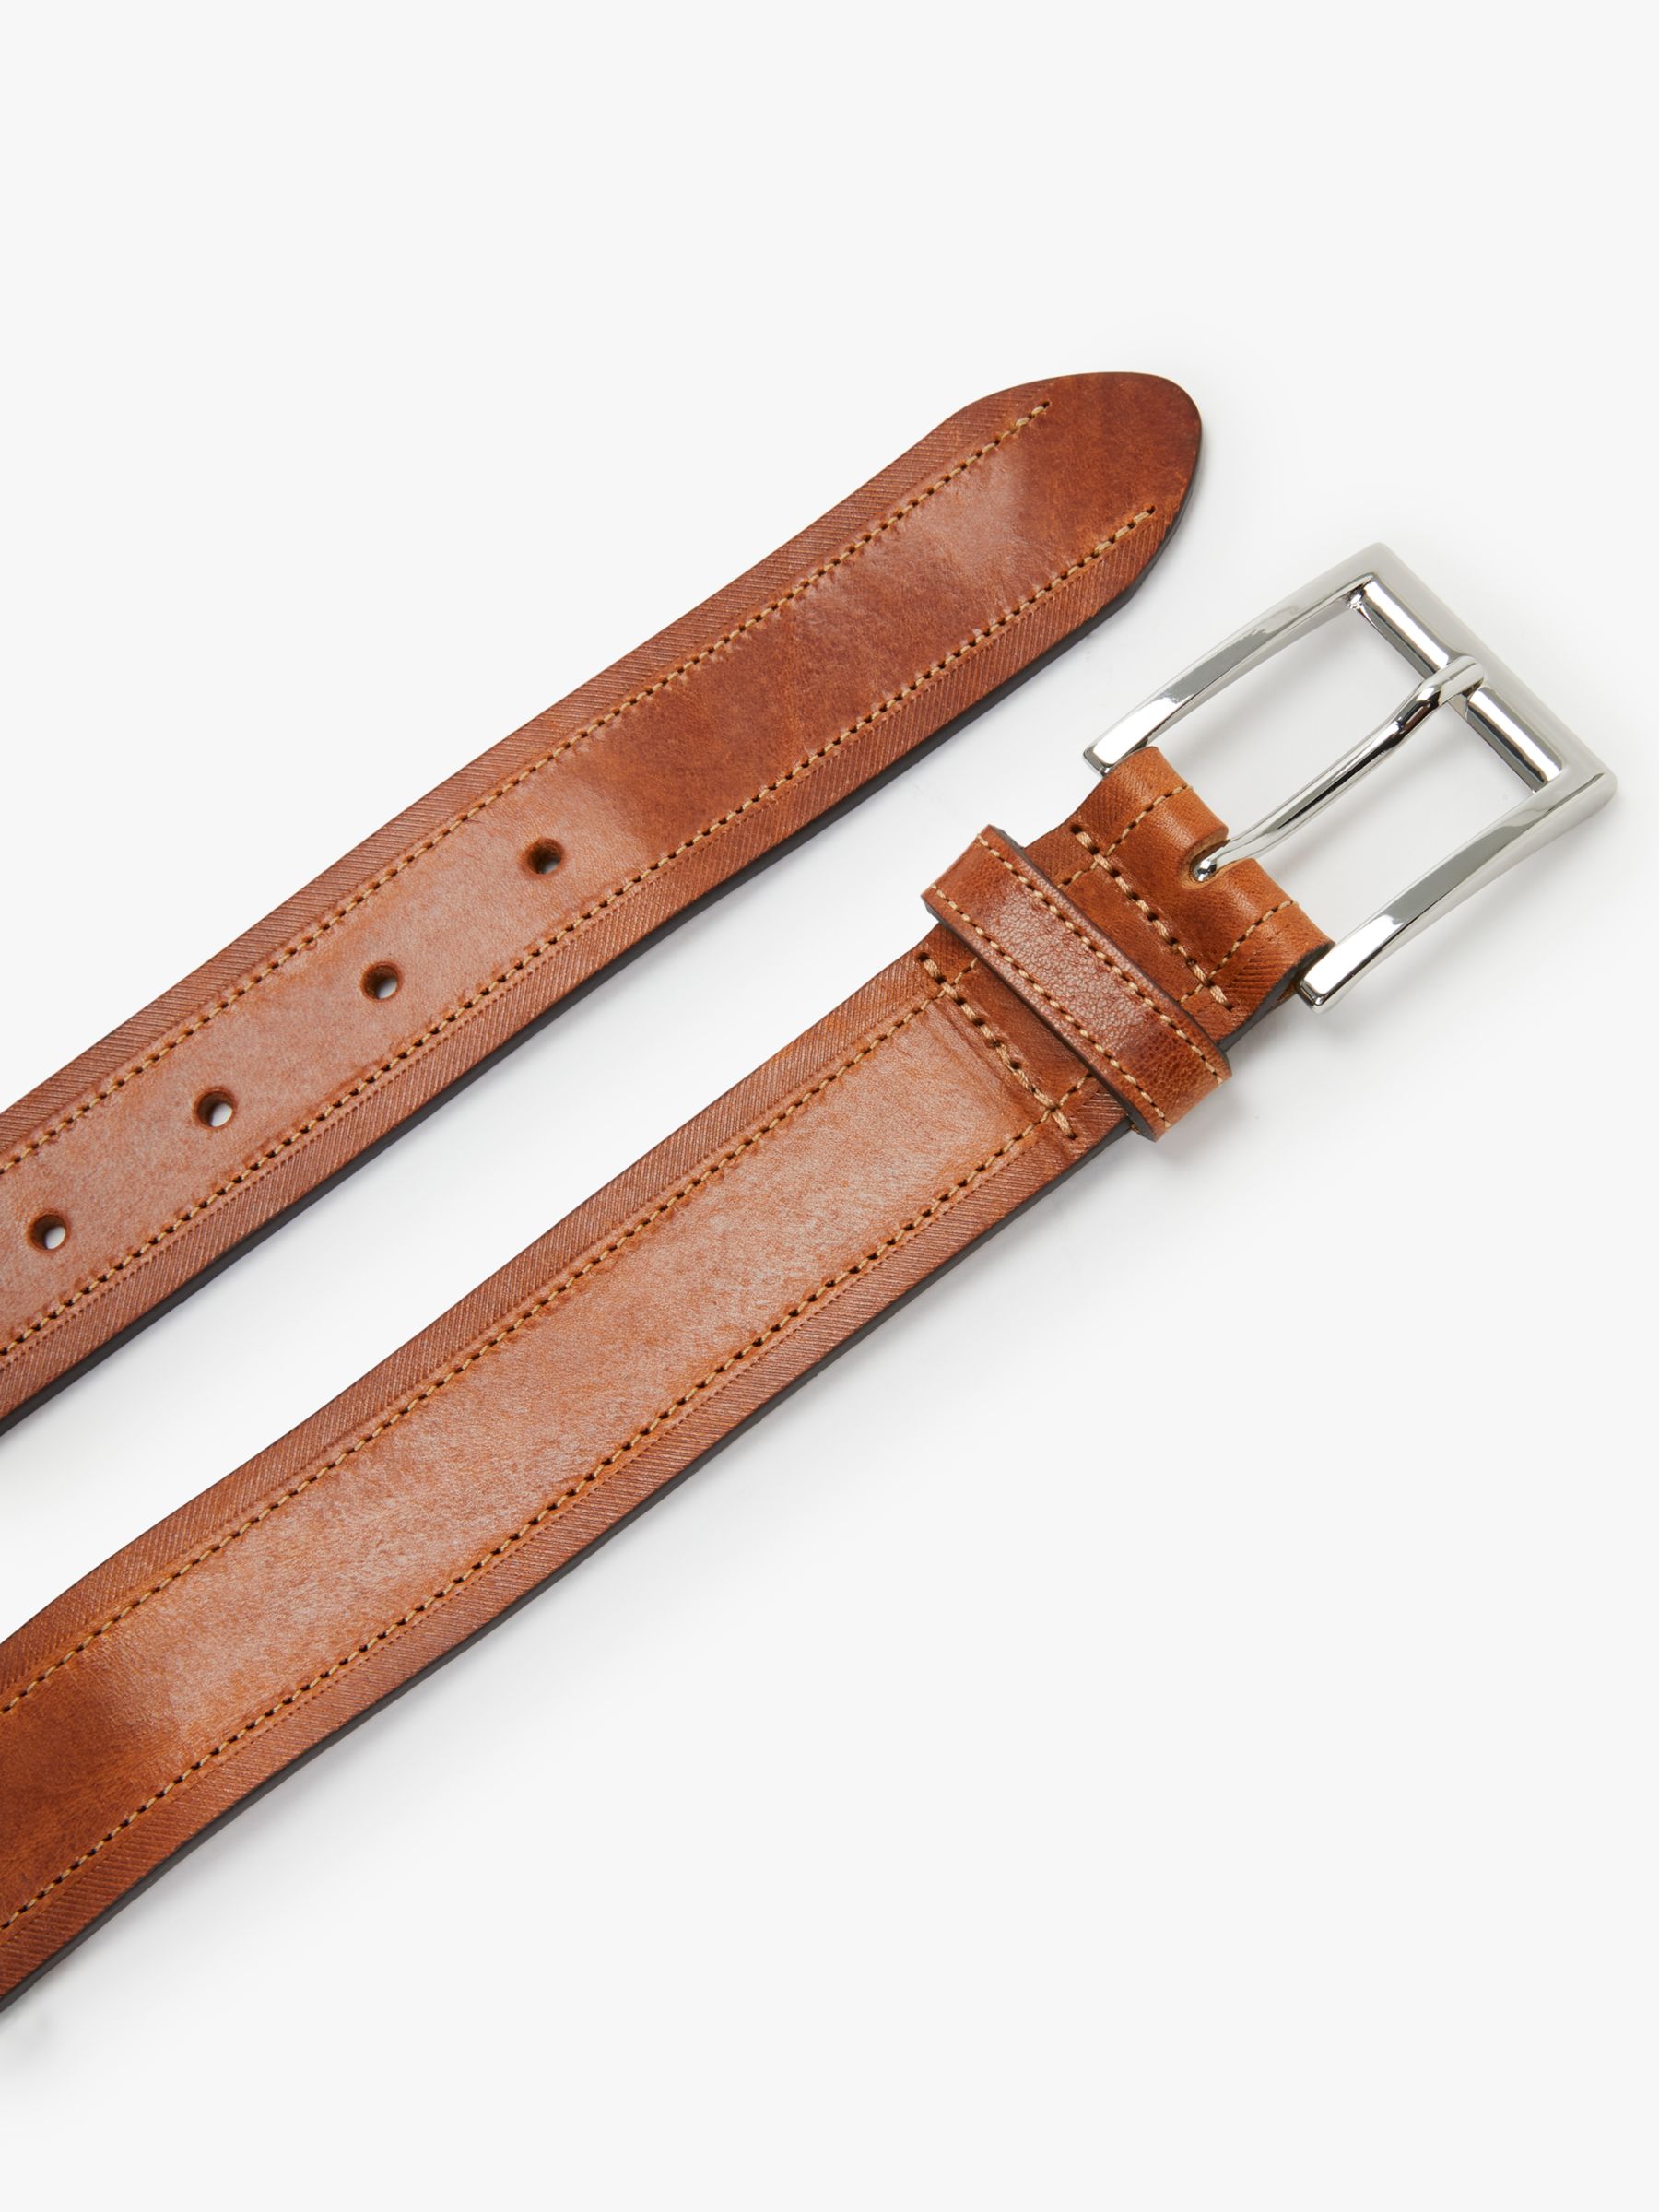 John Lewis Made in Italy Leather Chino Belt, Brown, S